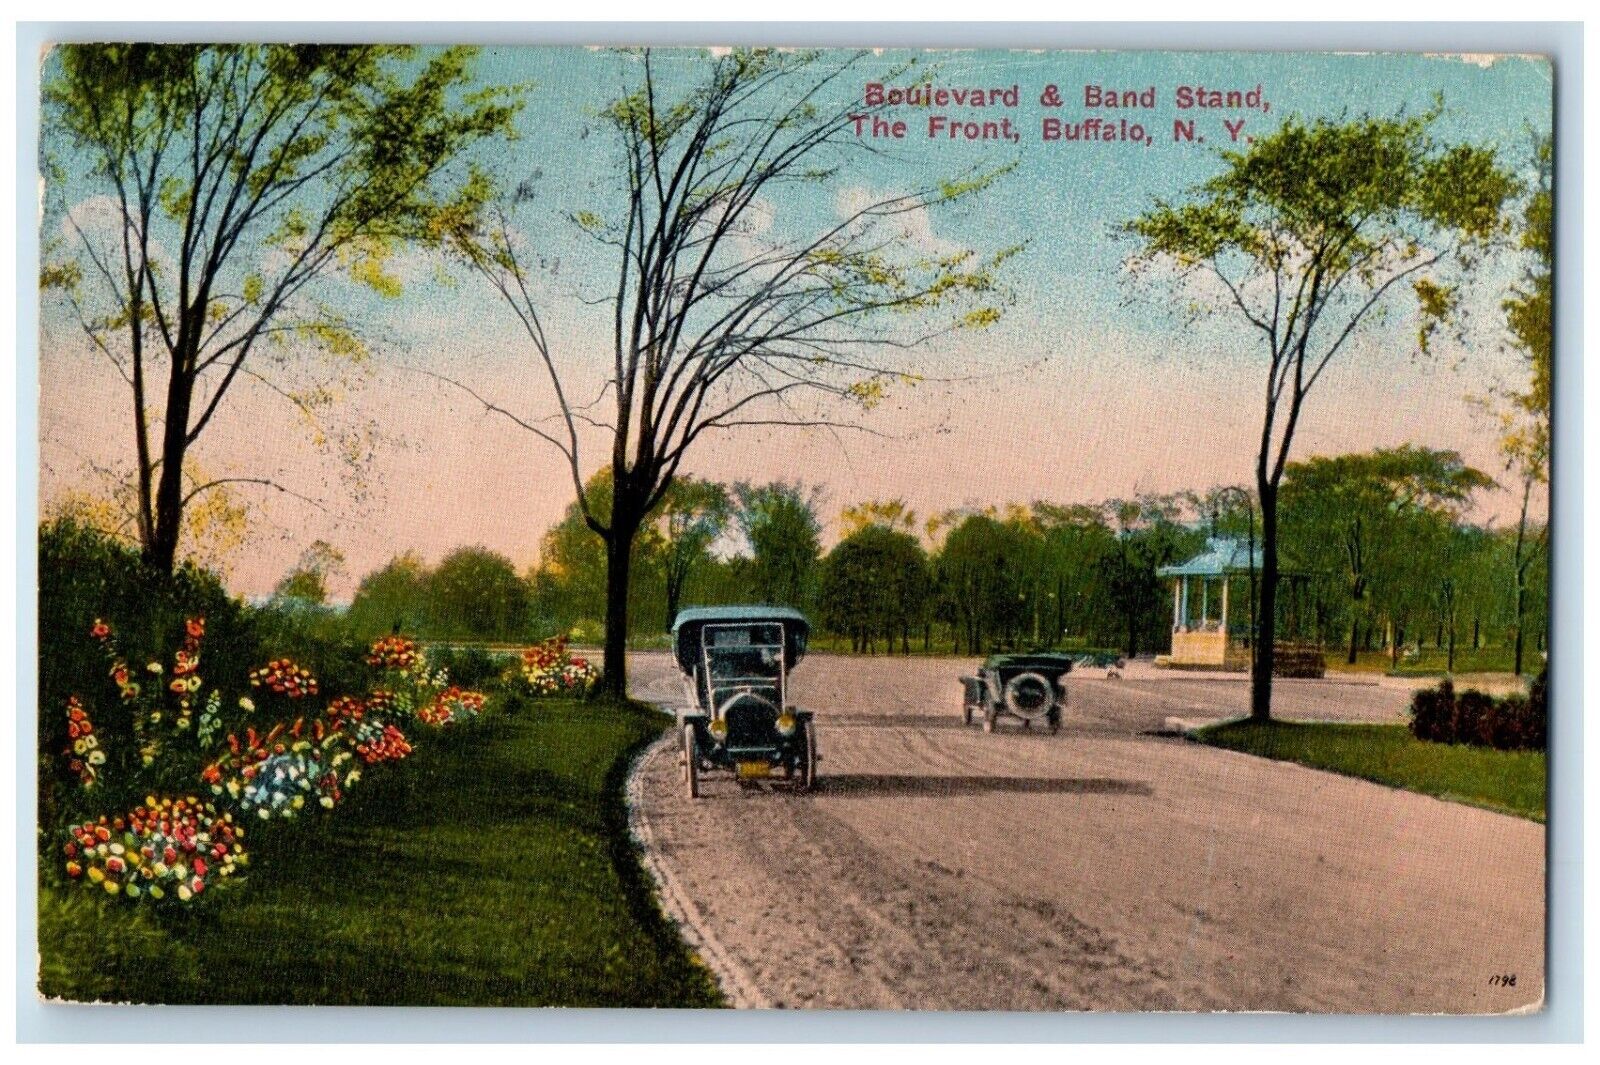 1916 Boulevard Band Stand Vintage Car Front Buffalo New York NY Antique Postcard